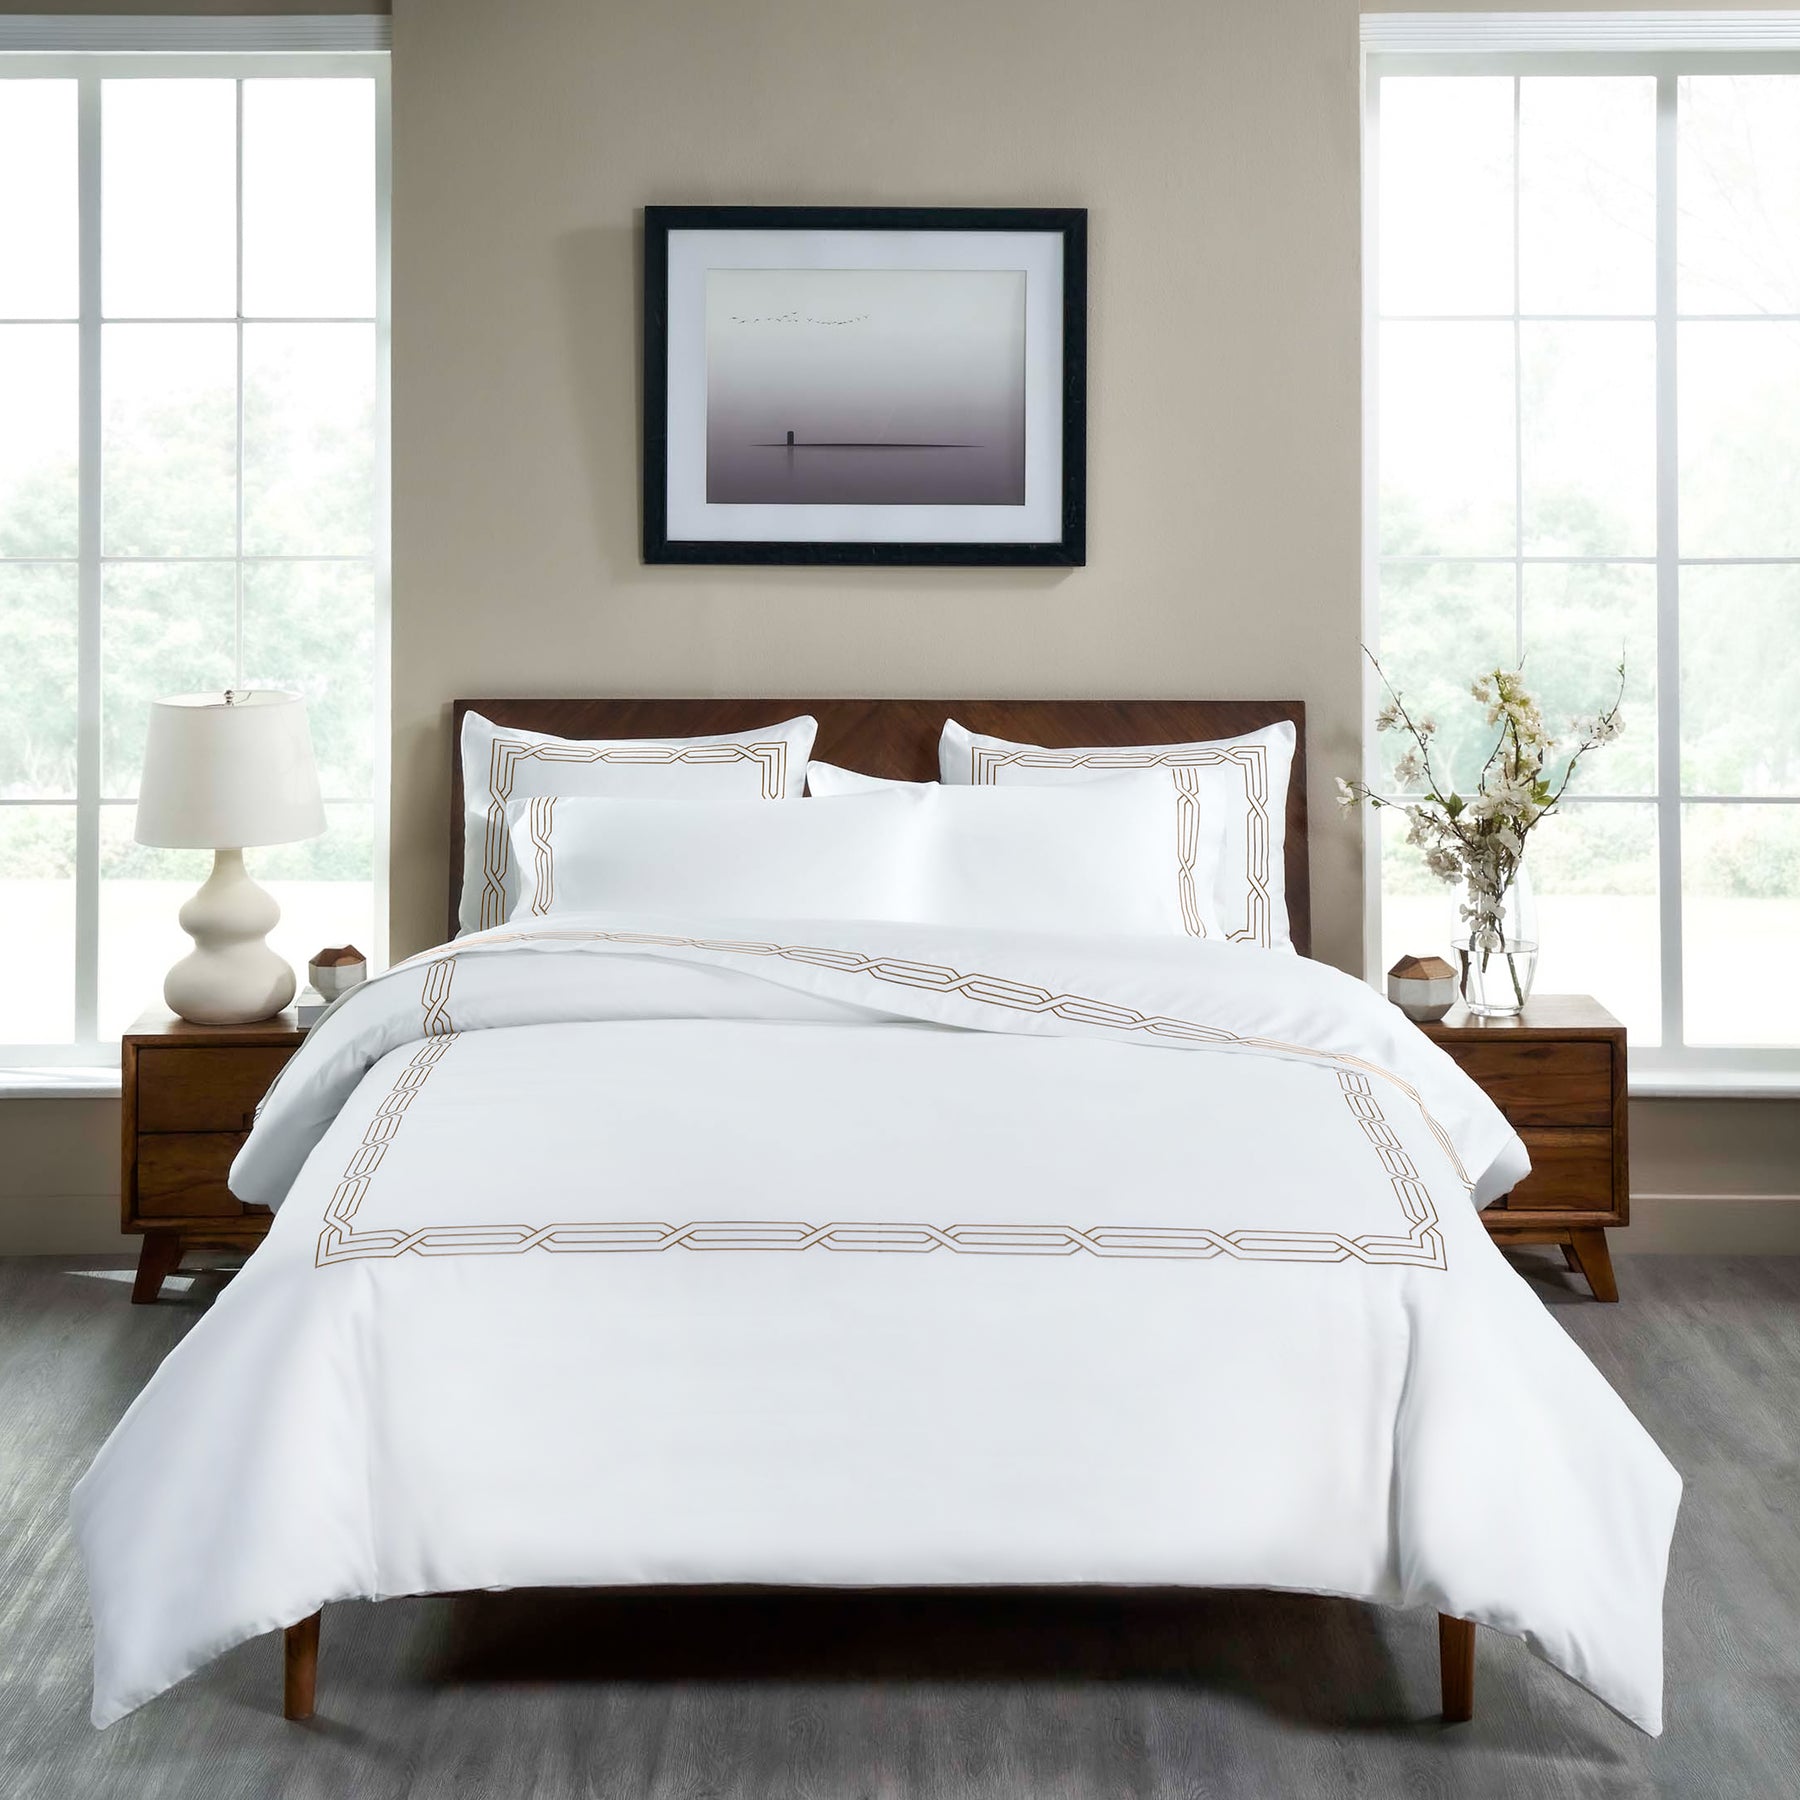 Superior Egyptian Cotton 1200 Thread Count Embroidered Geometric Scroll Duvet Cover Set - White-Taupe